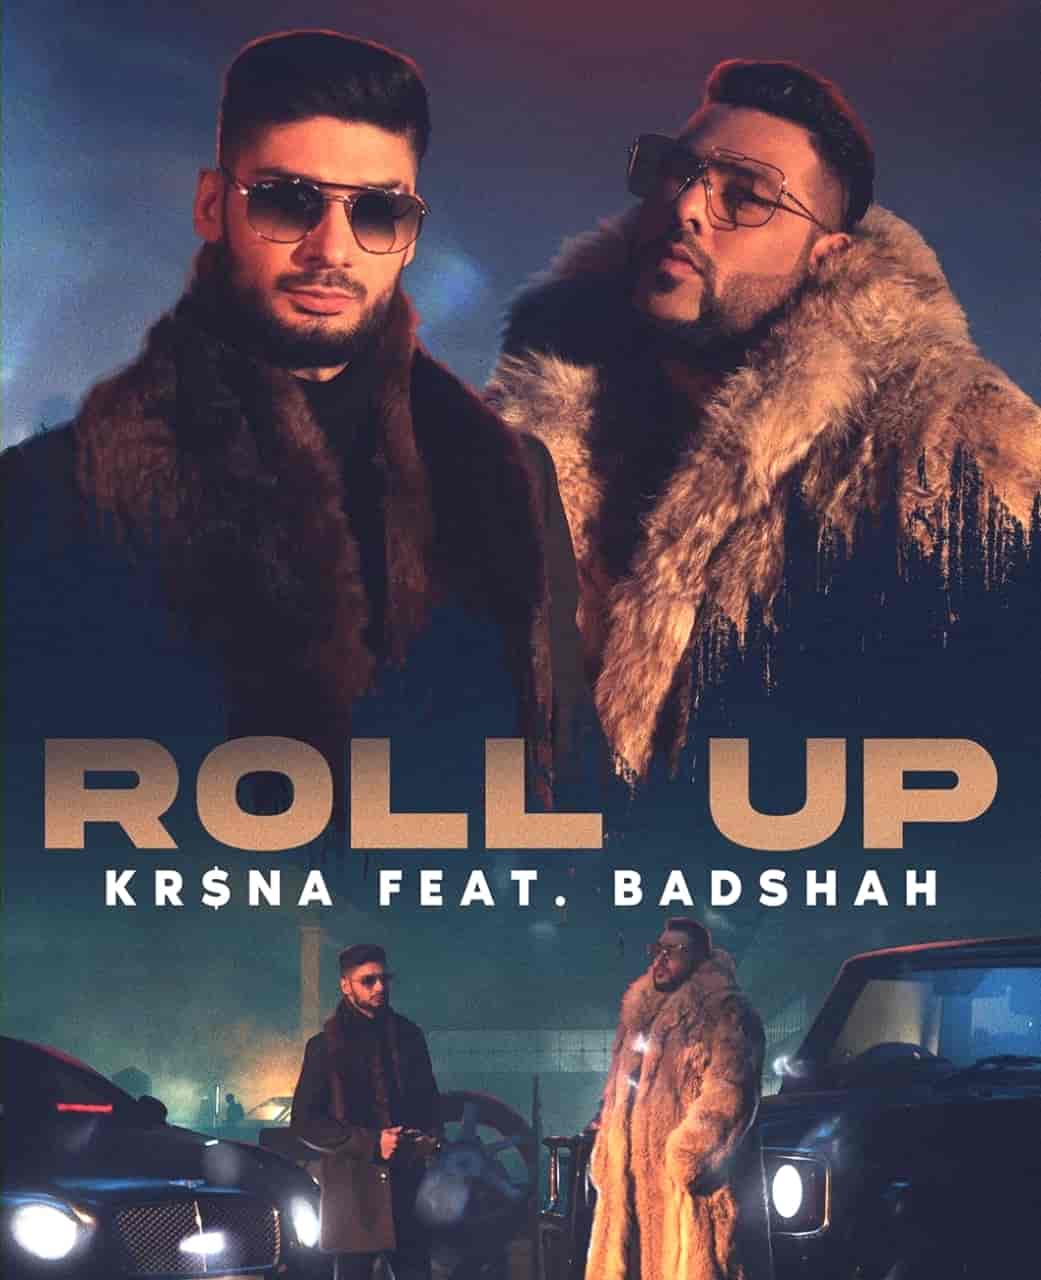 Roll Up Rap Song Lyrics Image Features Kr$na And Badshah